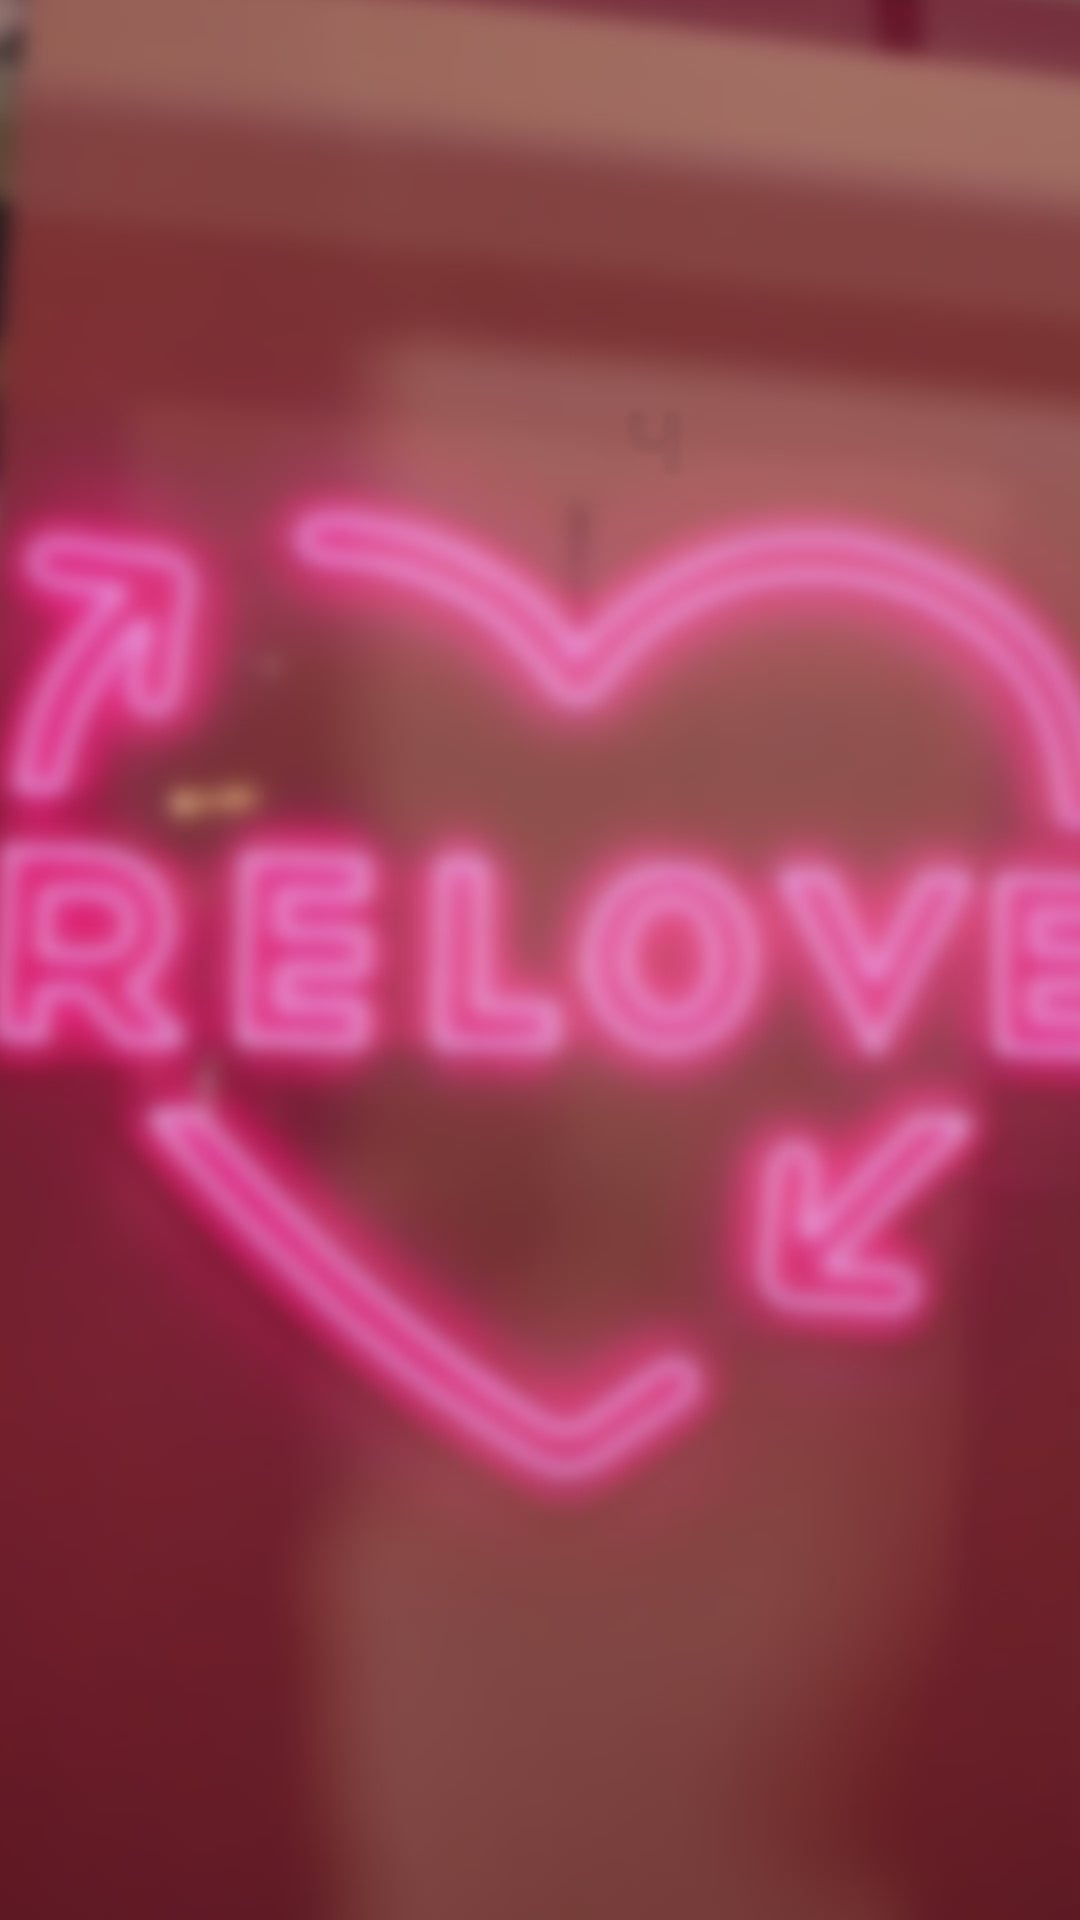 The Relove Experience is now for sale! Get a group and come on down.